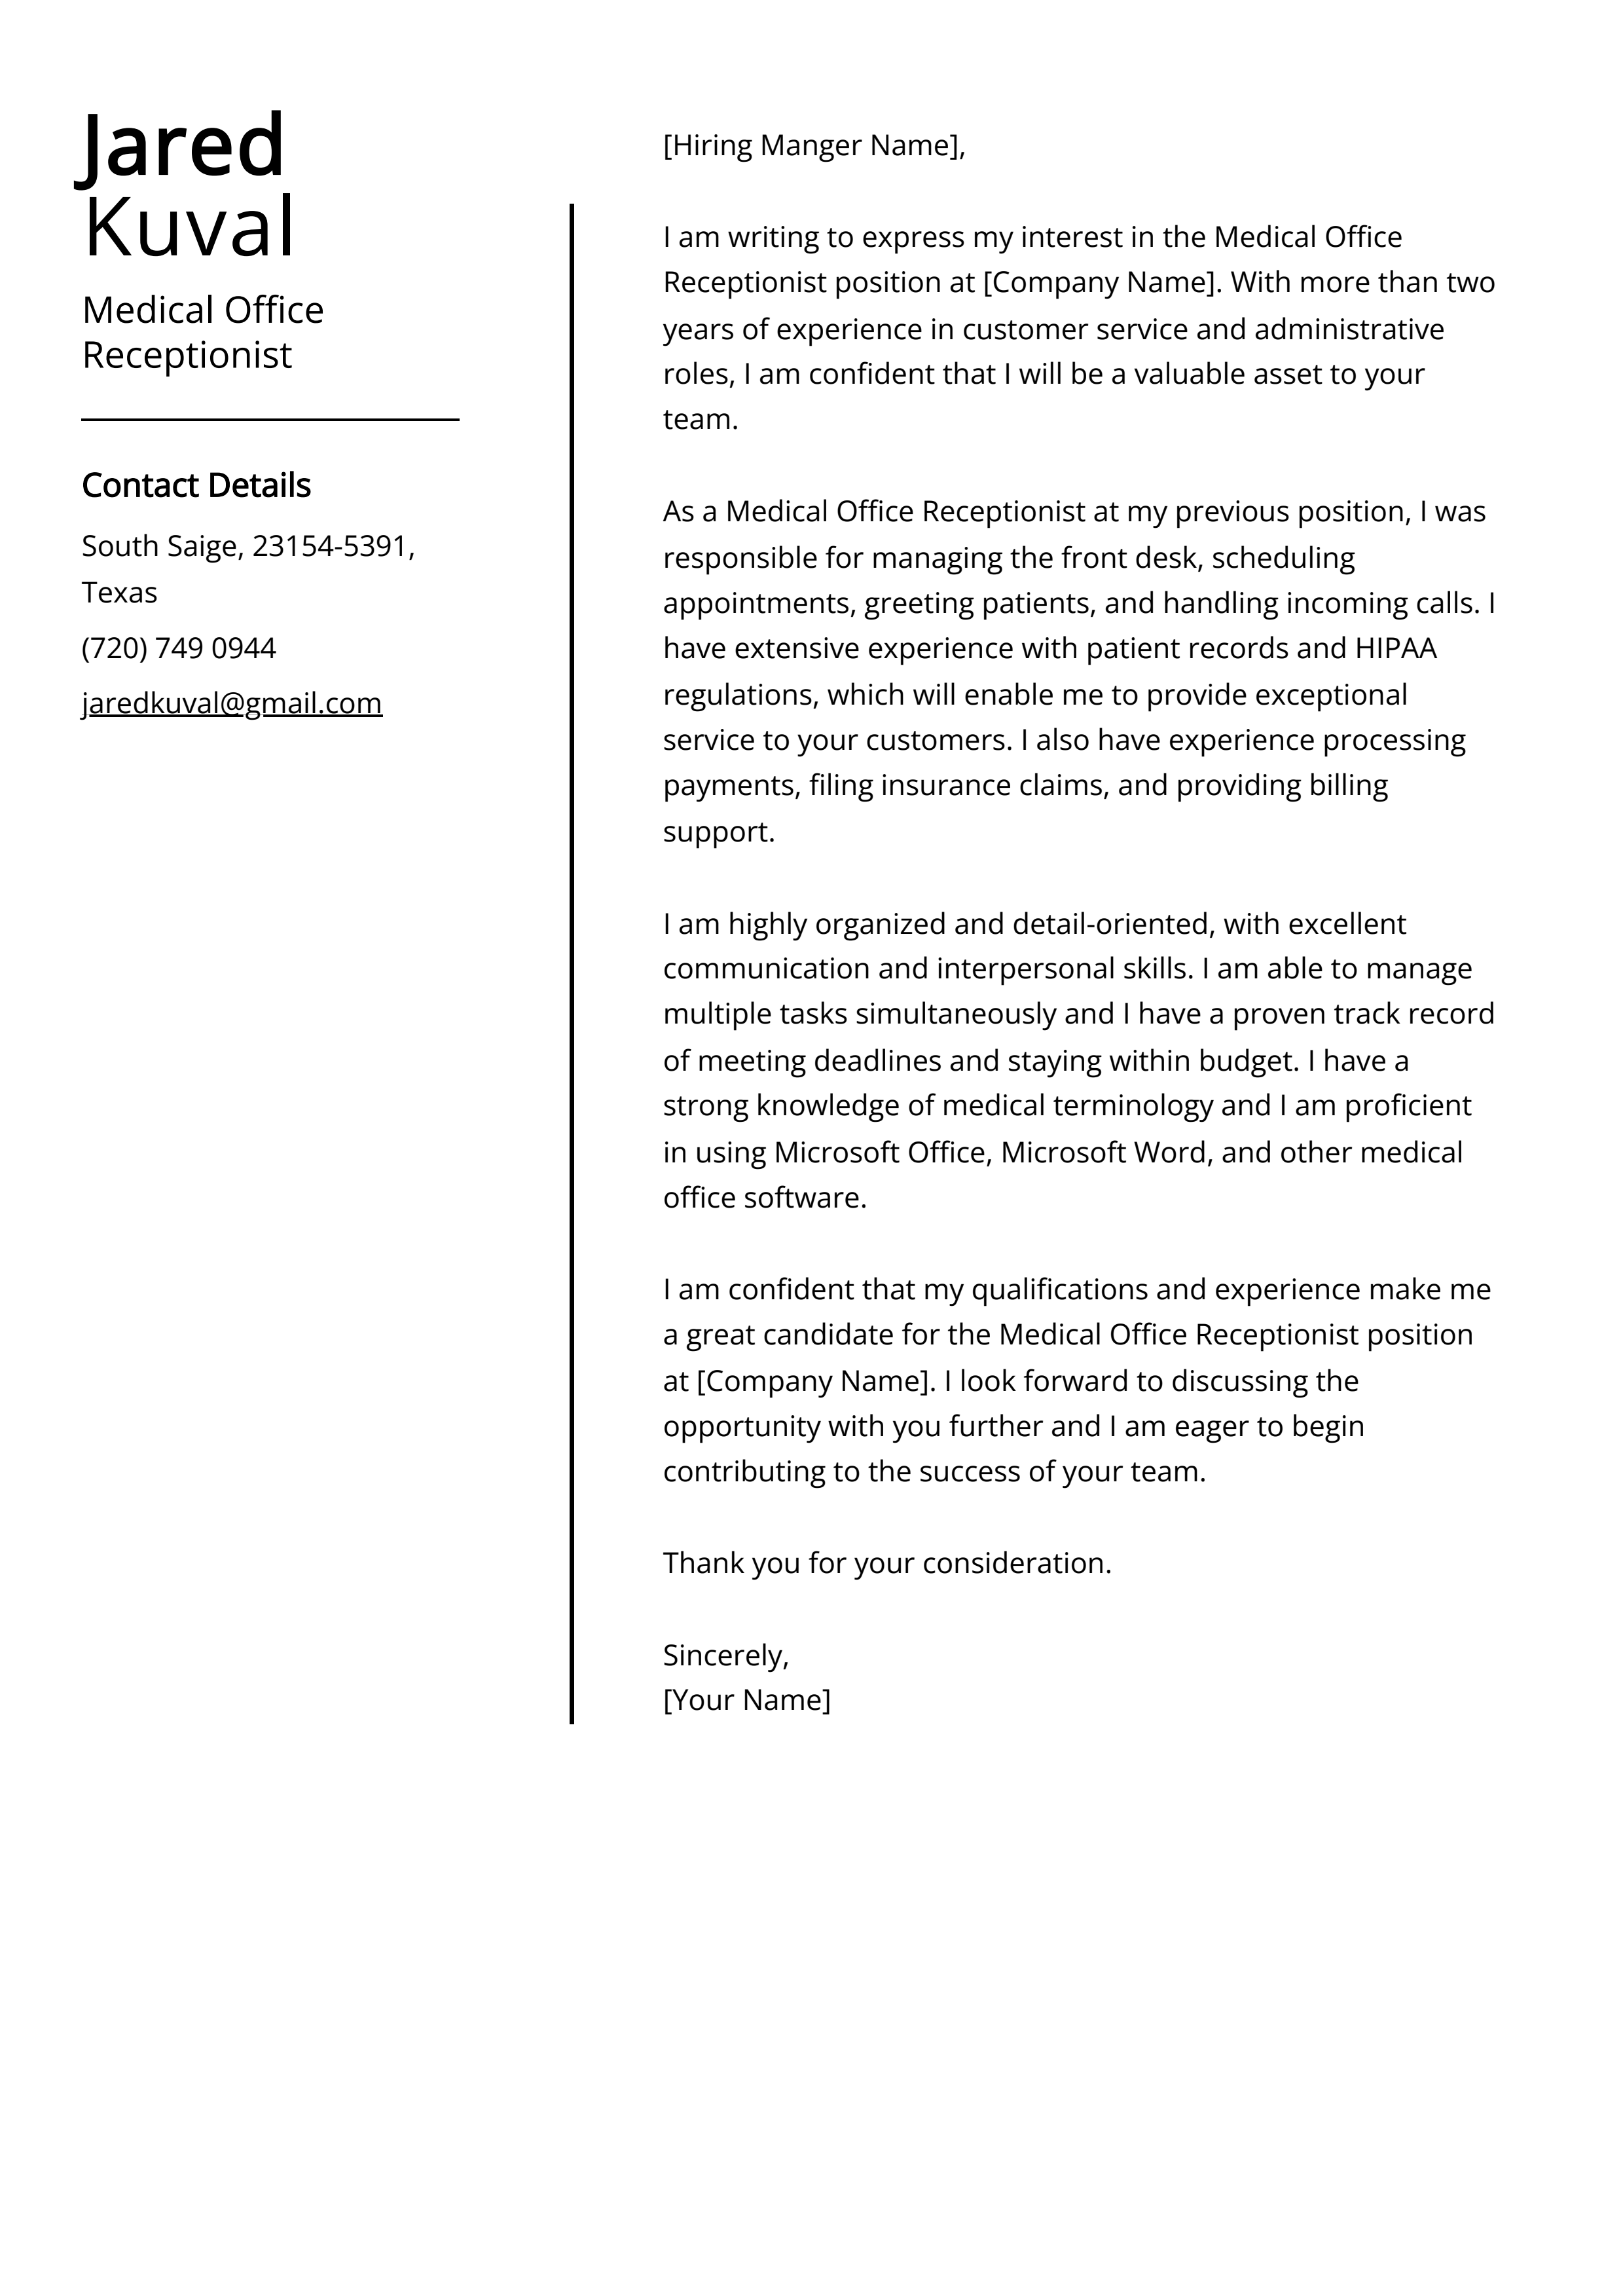 Medical Office Receptionist Cover Letter Example